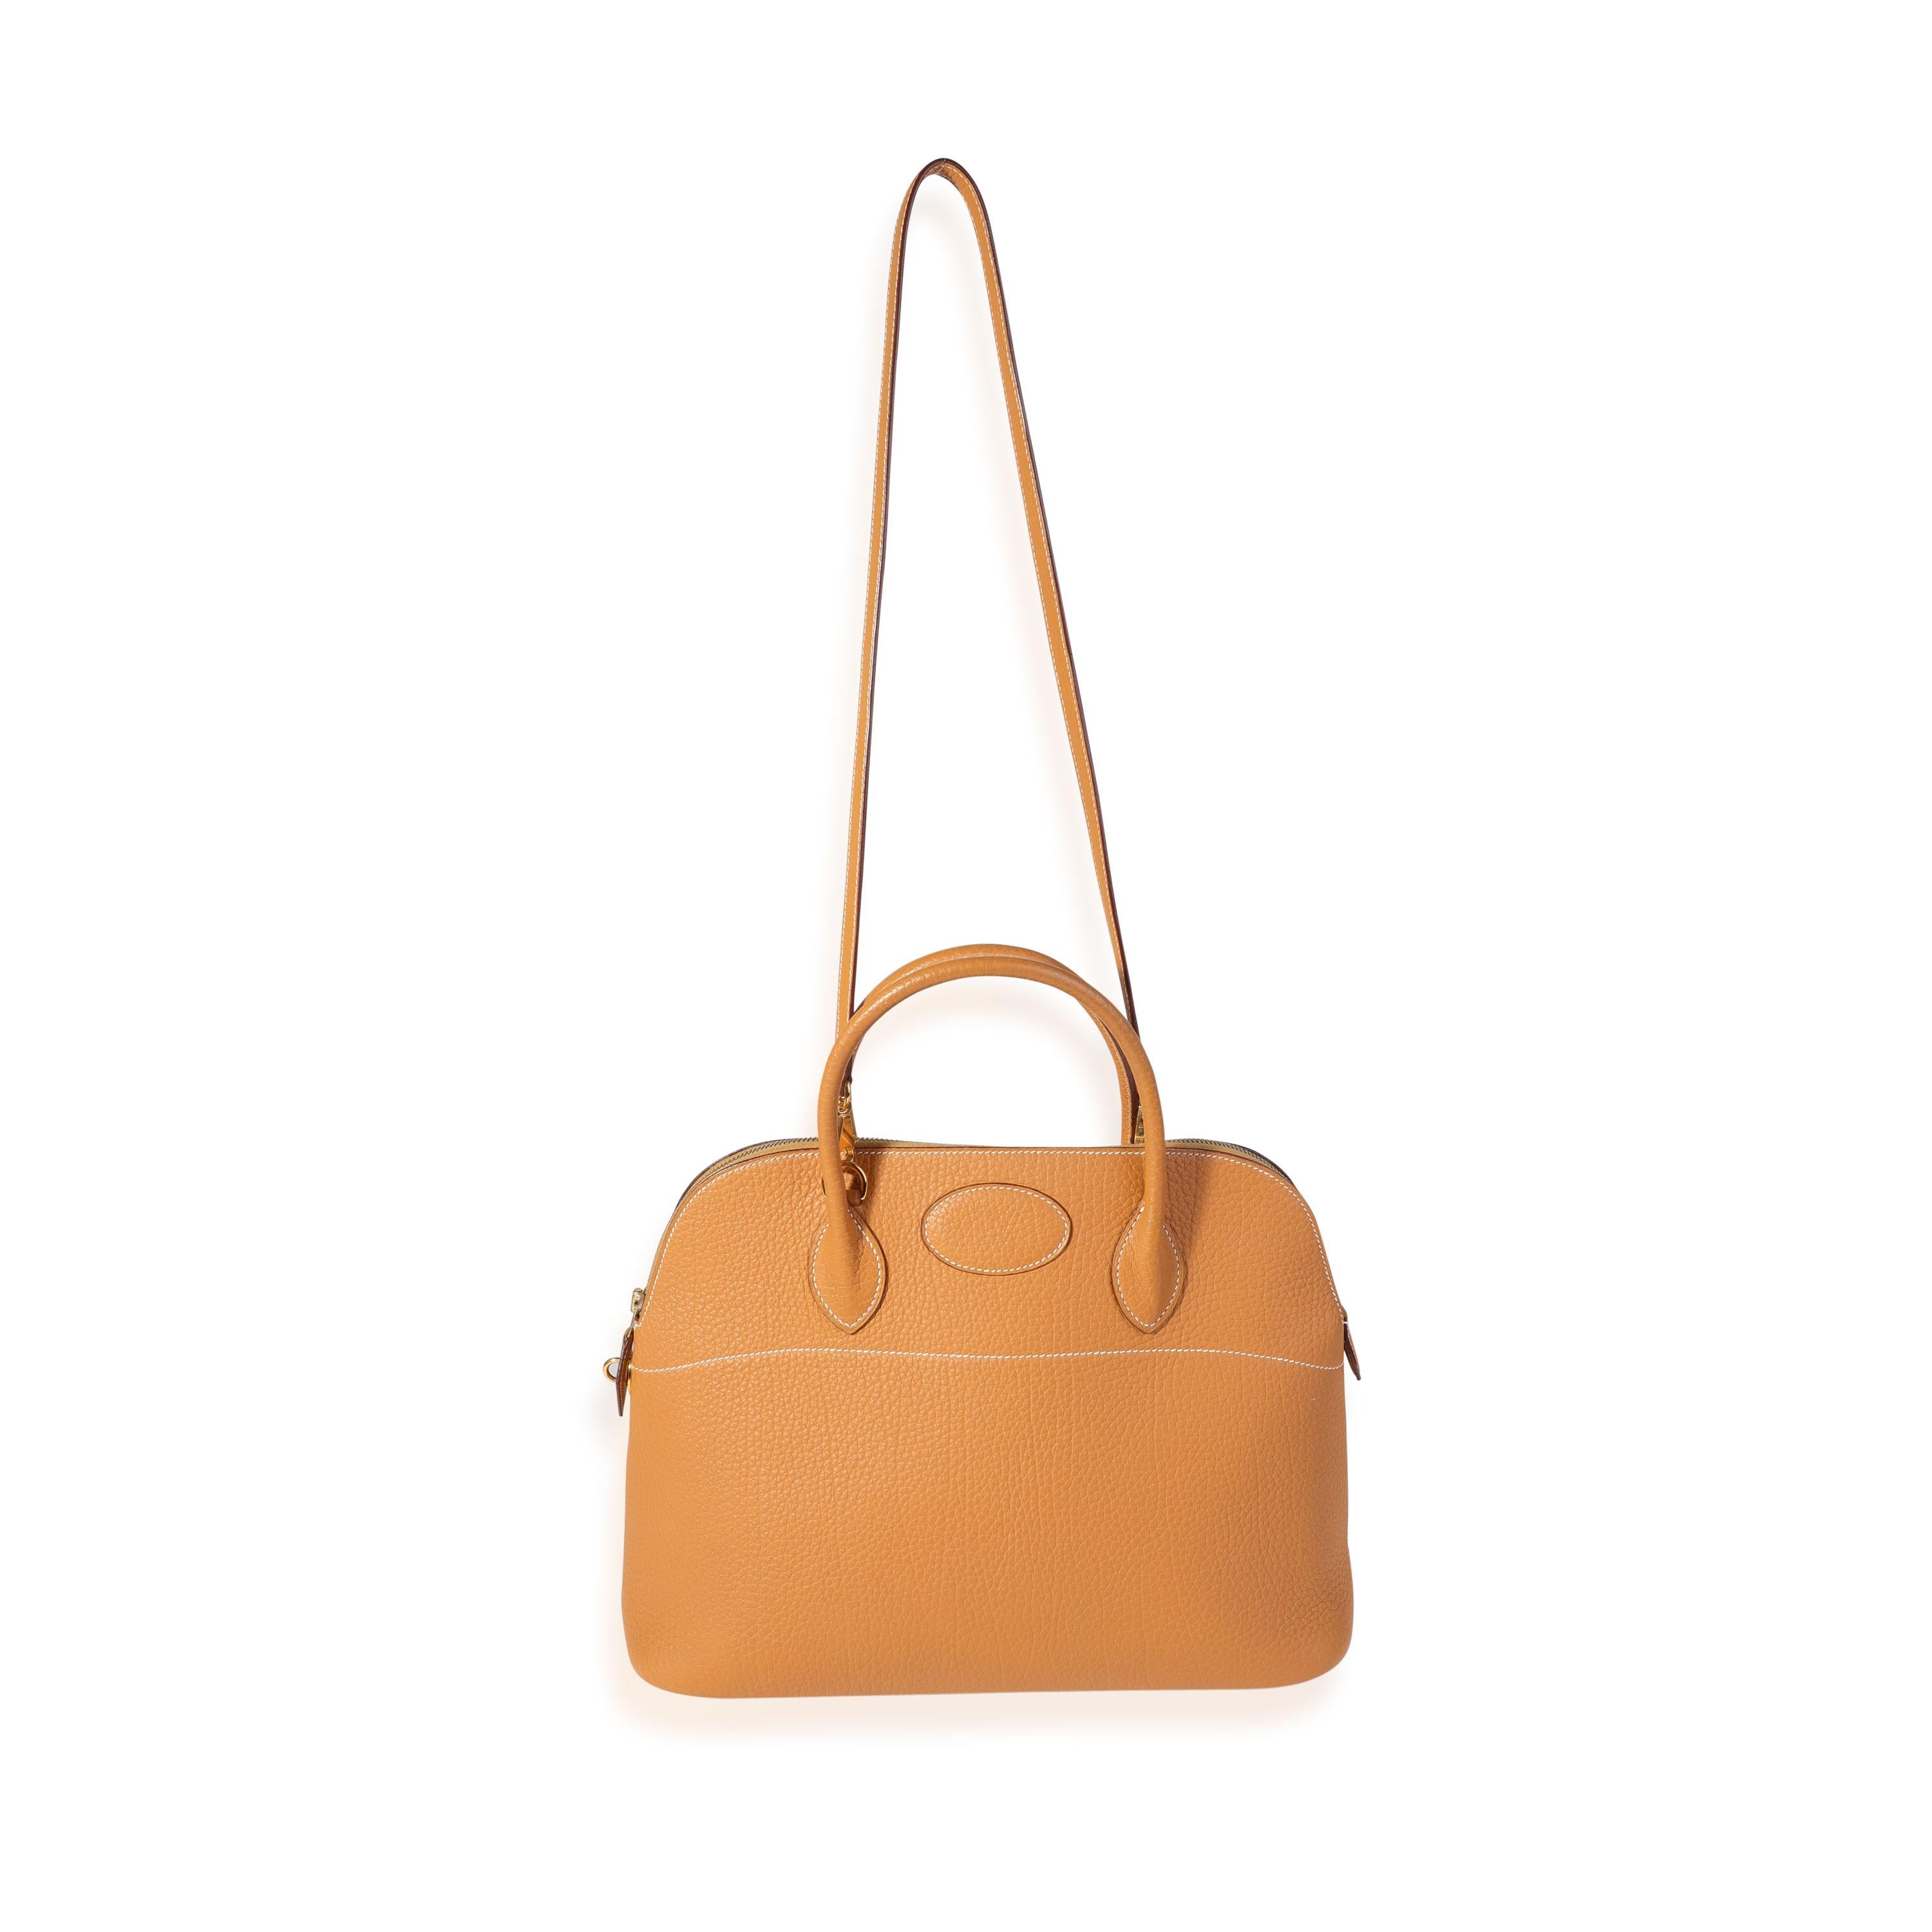 Listing Title: Hermès Natural Fjord Bolide 35 GHW
SKU: 121264
Condition: Pre-owned 
Handbag Condition: Very Good
Condition Comments: Very Good Condition. Scuffing to corners. Light discoloration to leather. Scratching and light tarnishing to